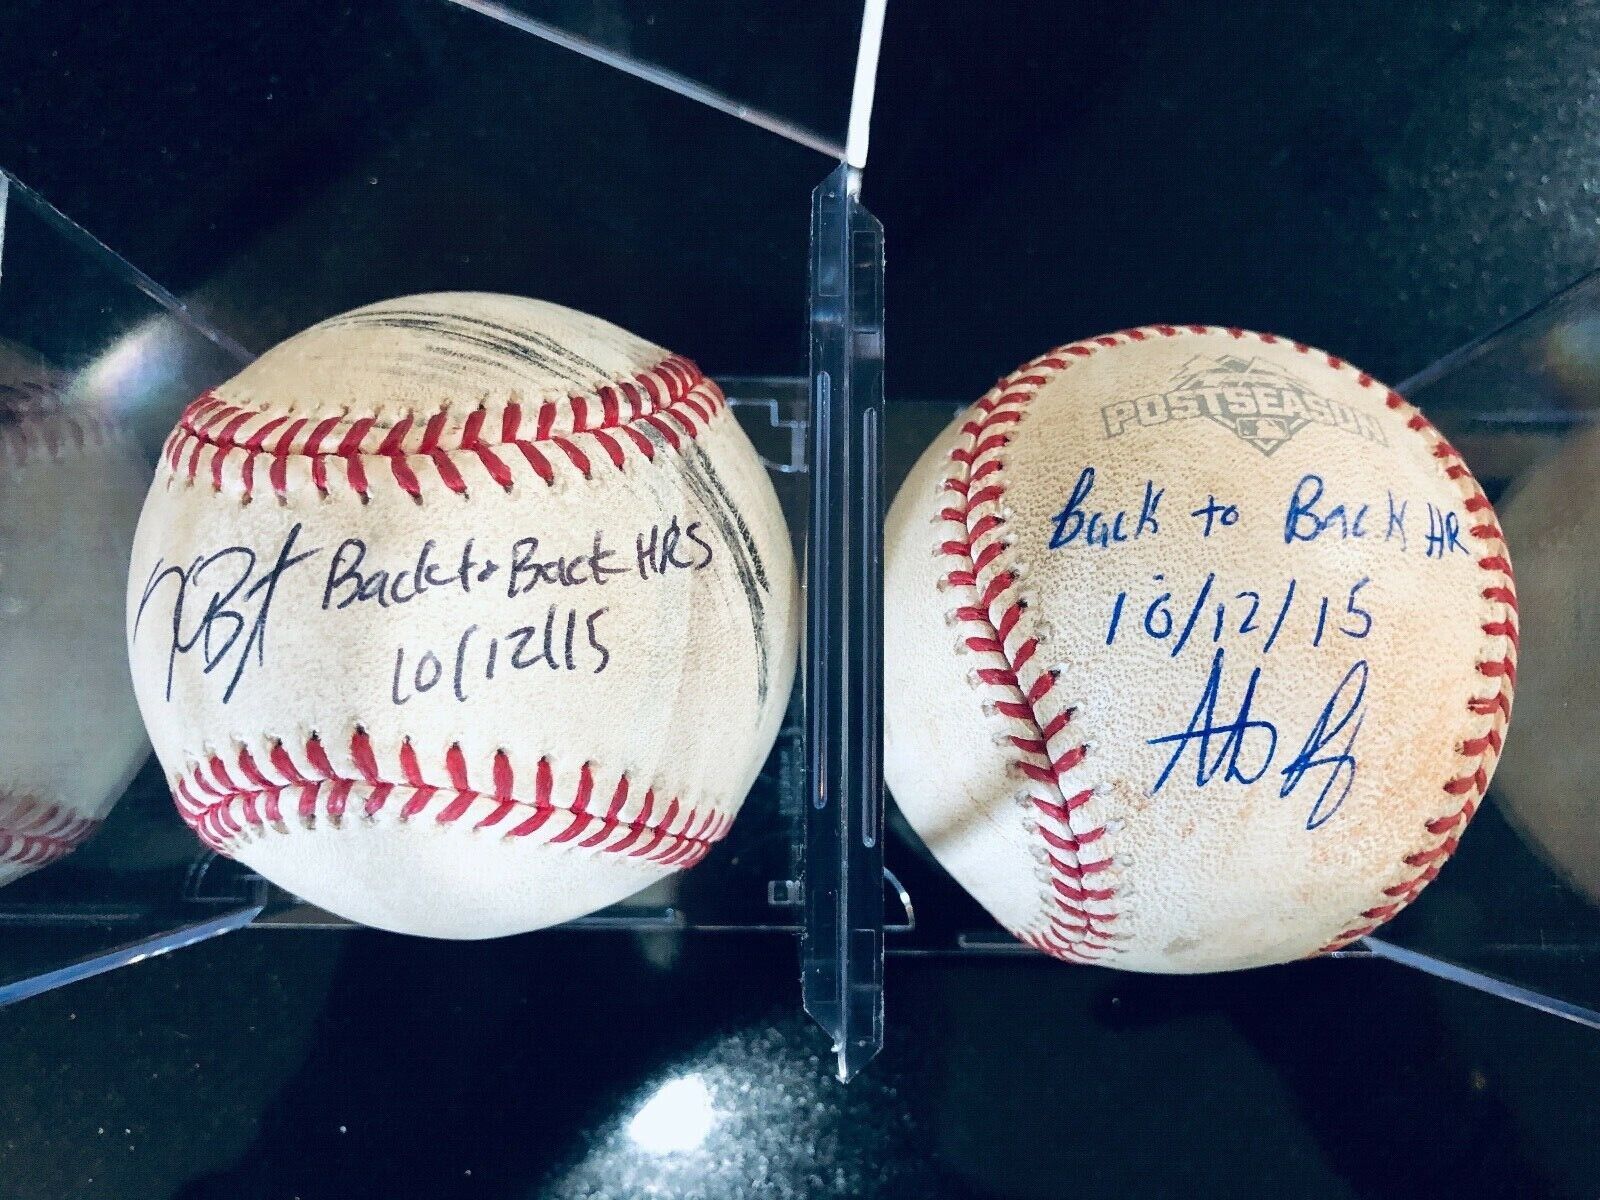 Kris Bryant Anthony Rizzo 2 Game NLDS balls Inscribed Back to Back HR's 10/12/15 Без бренда